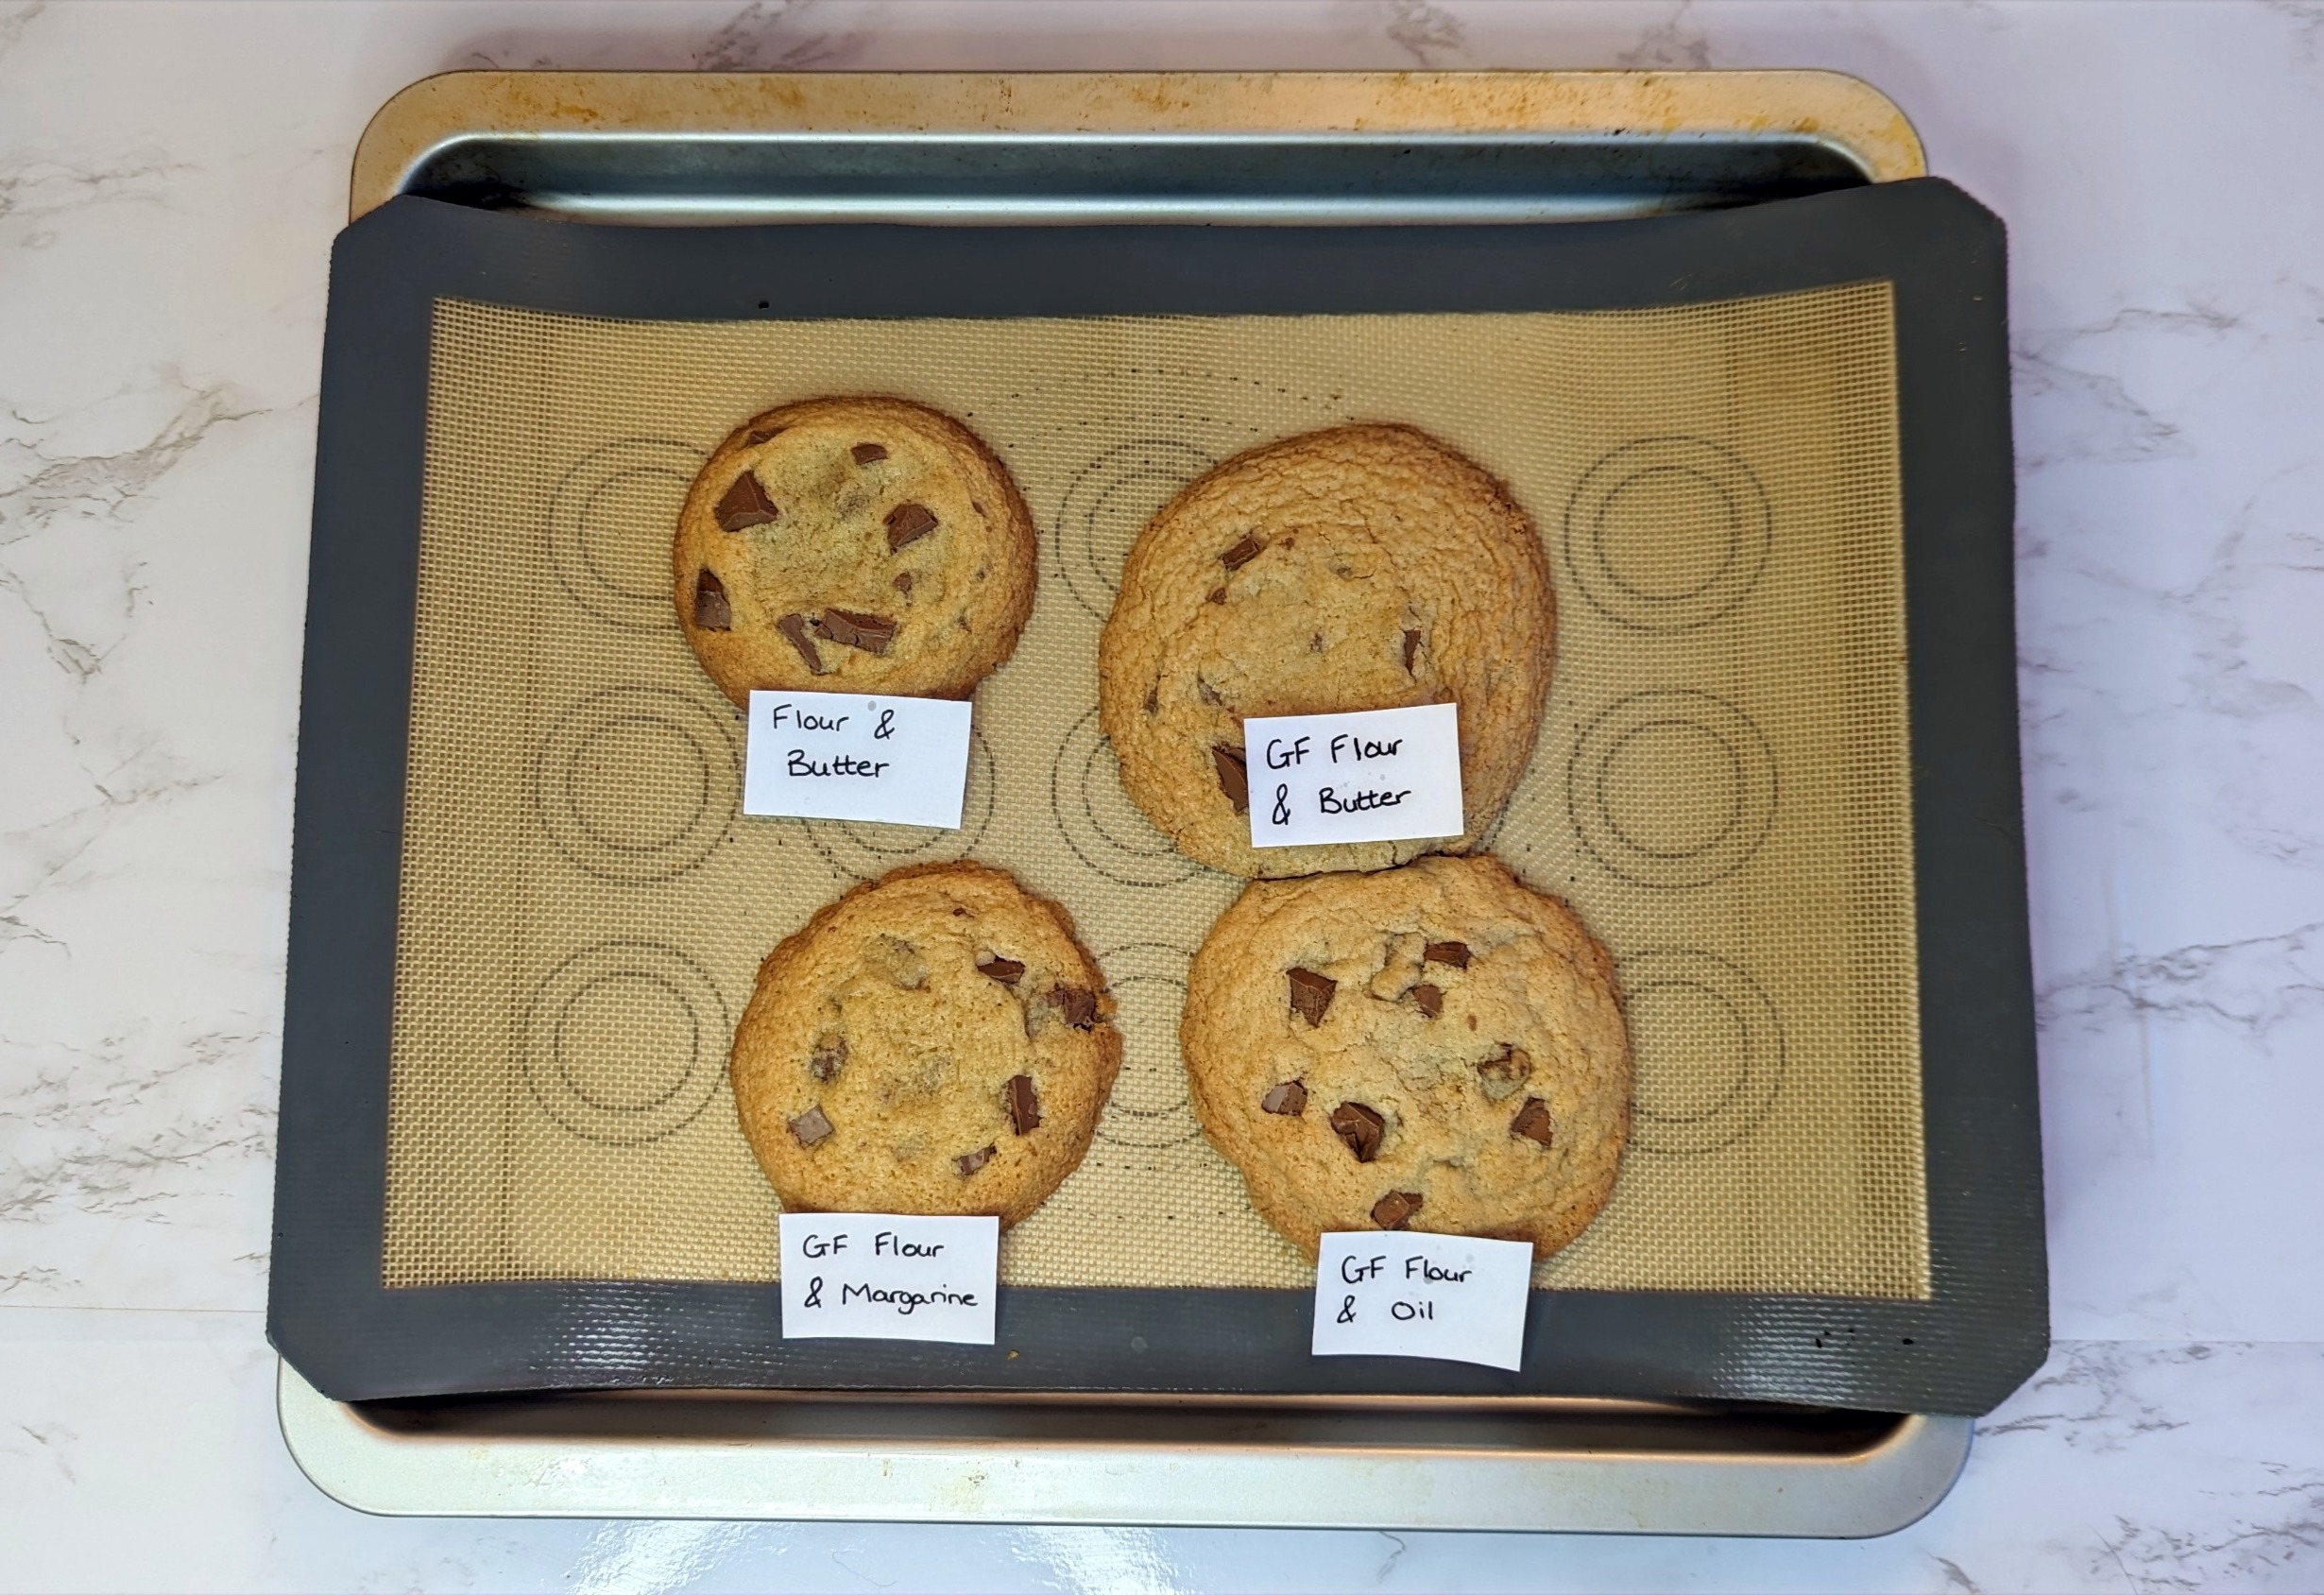 Variations of baked cookie recipes